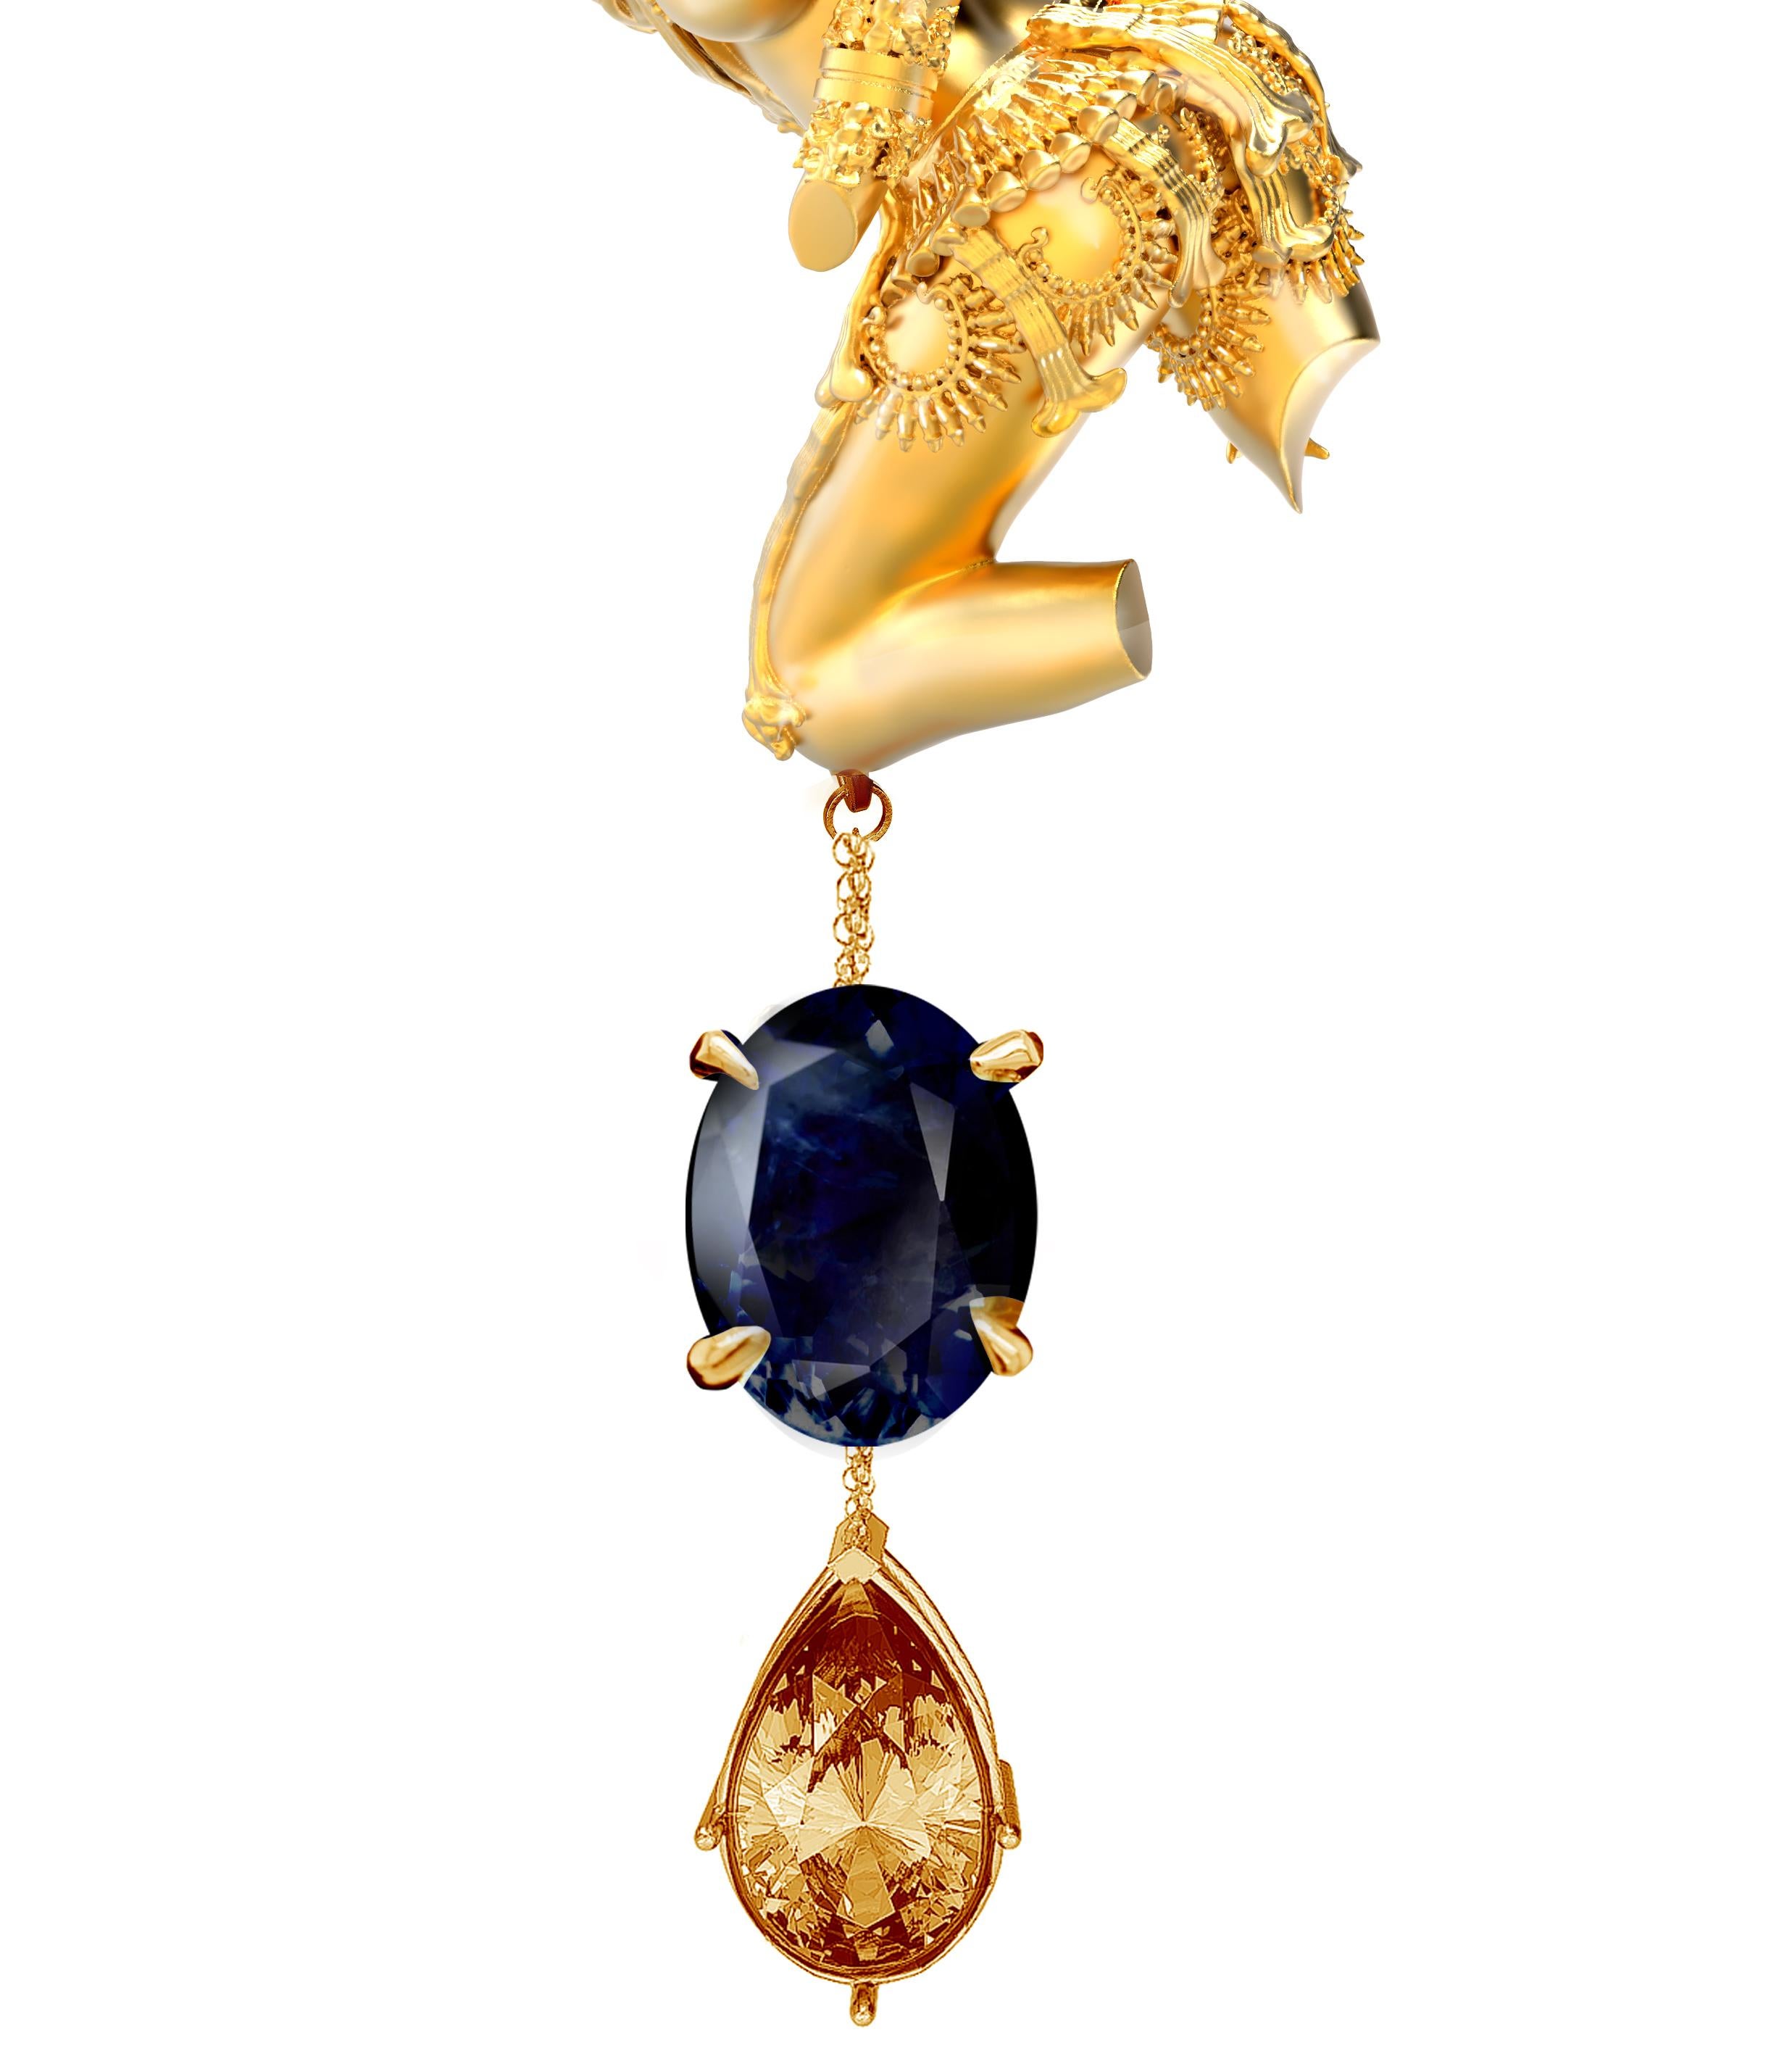 Contemporary Eighteen Karat Yellow Gold Pendant Necklace with Dark Blue Sapphire and Citrine For Sale